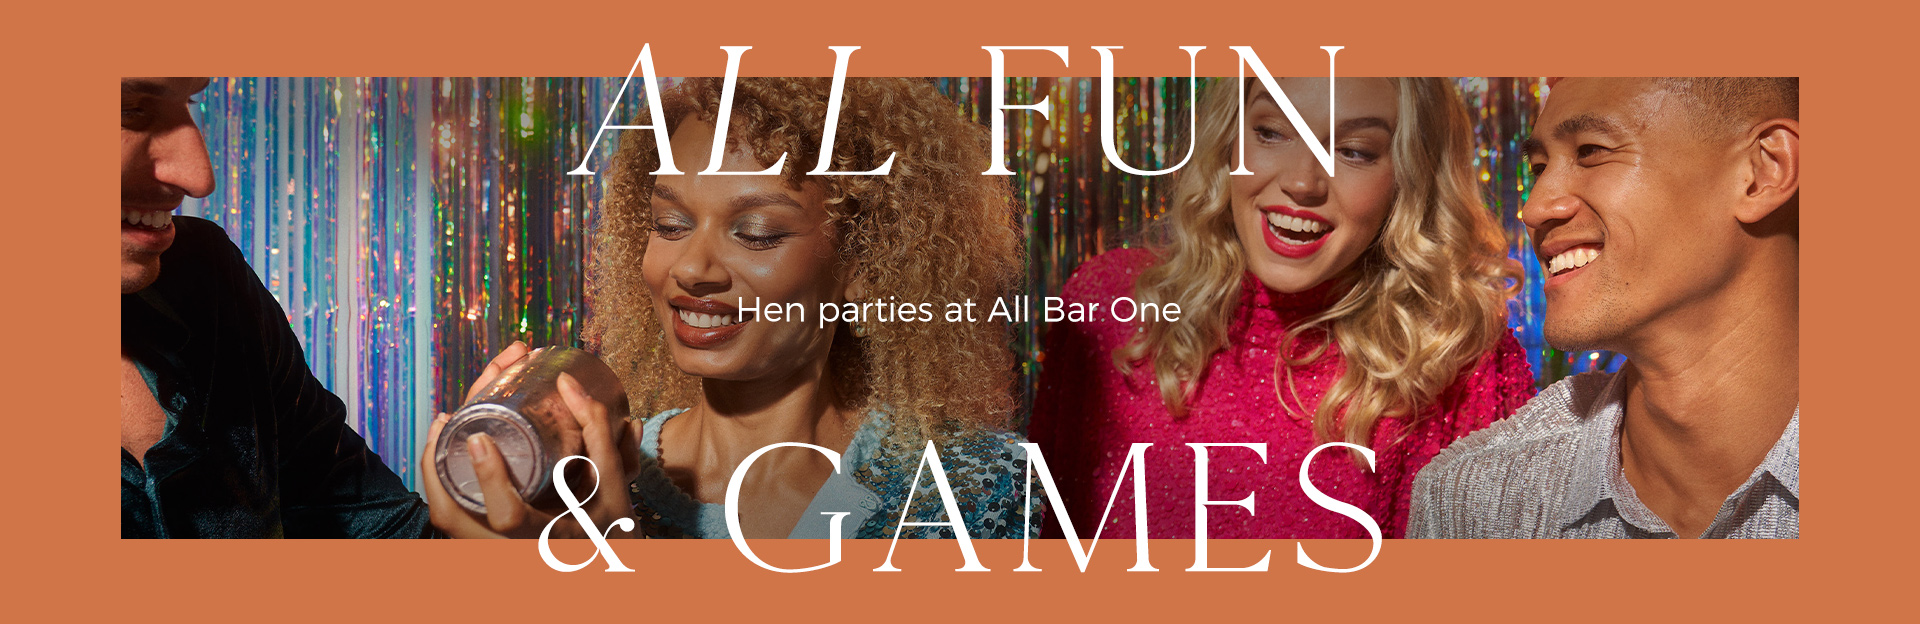 Hen parties at All Bar One Newcastle